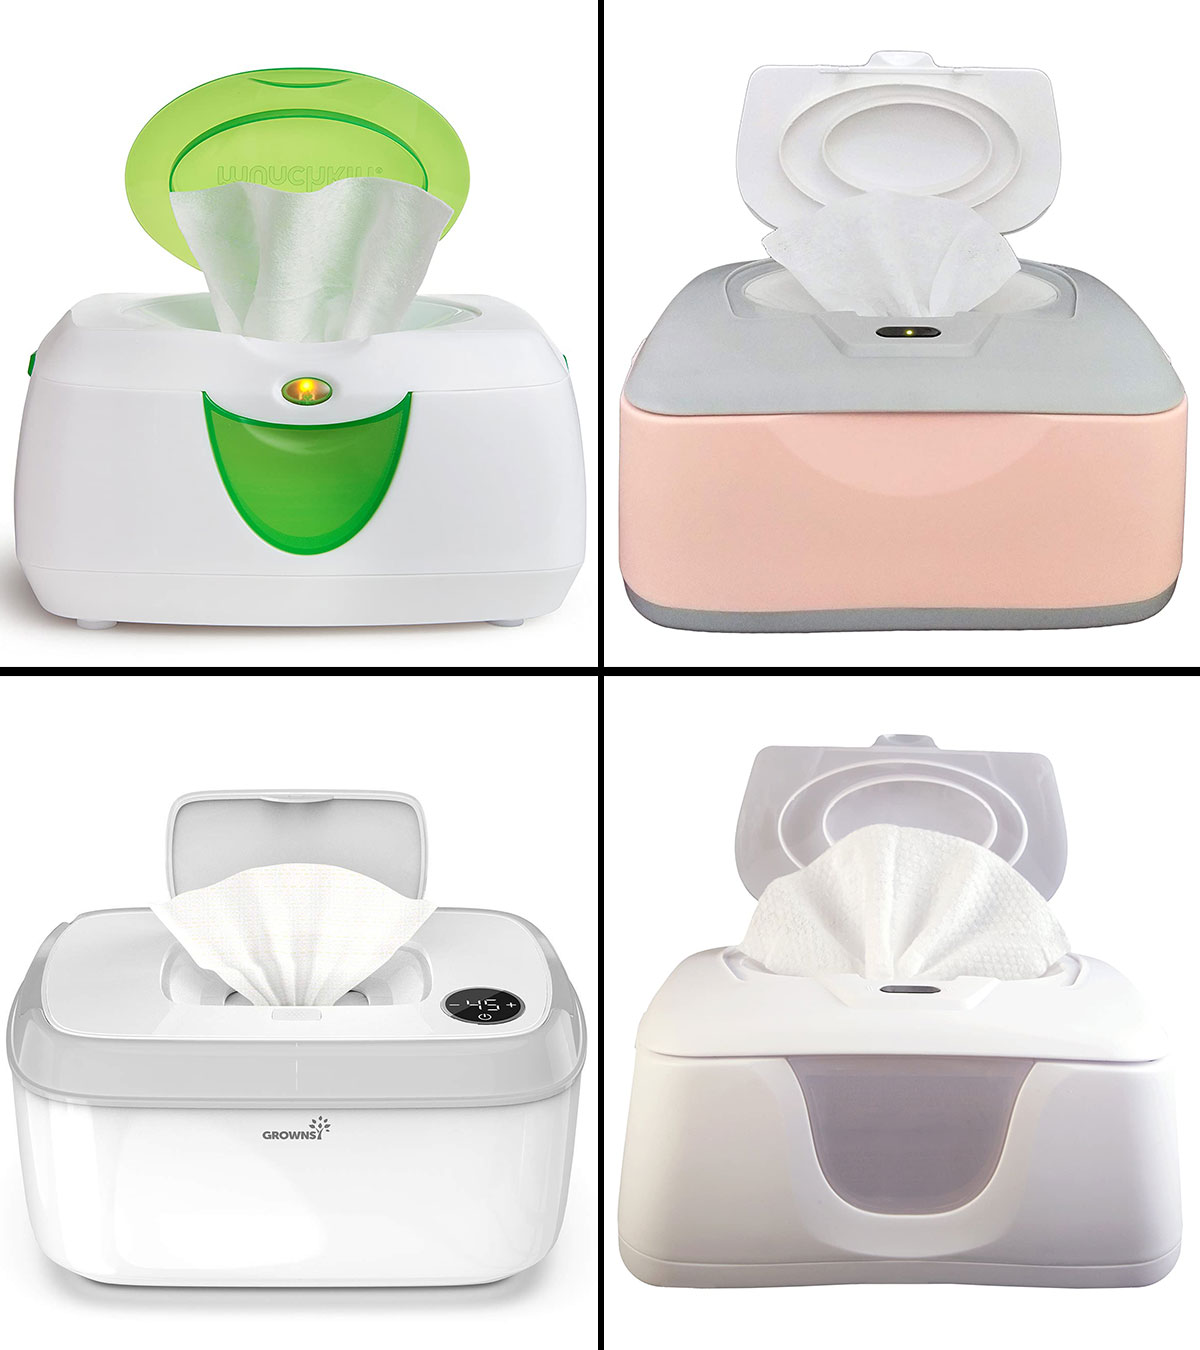 11 Best Wipe Warmers For Babies' Soft And Delicate Skin, 2023